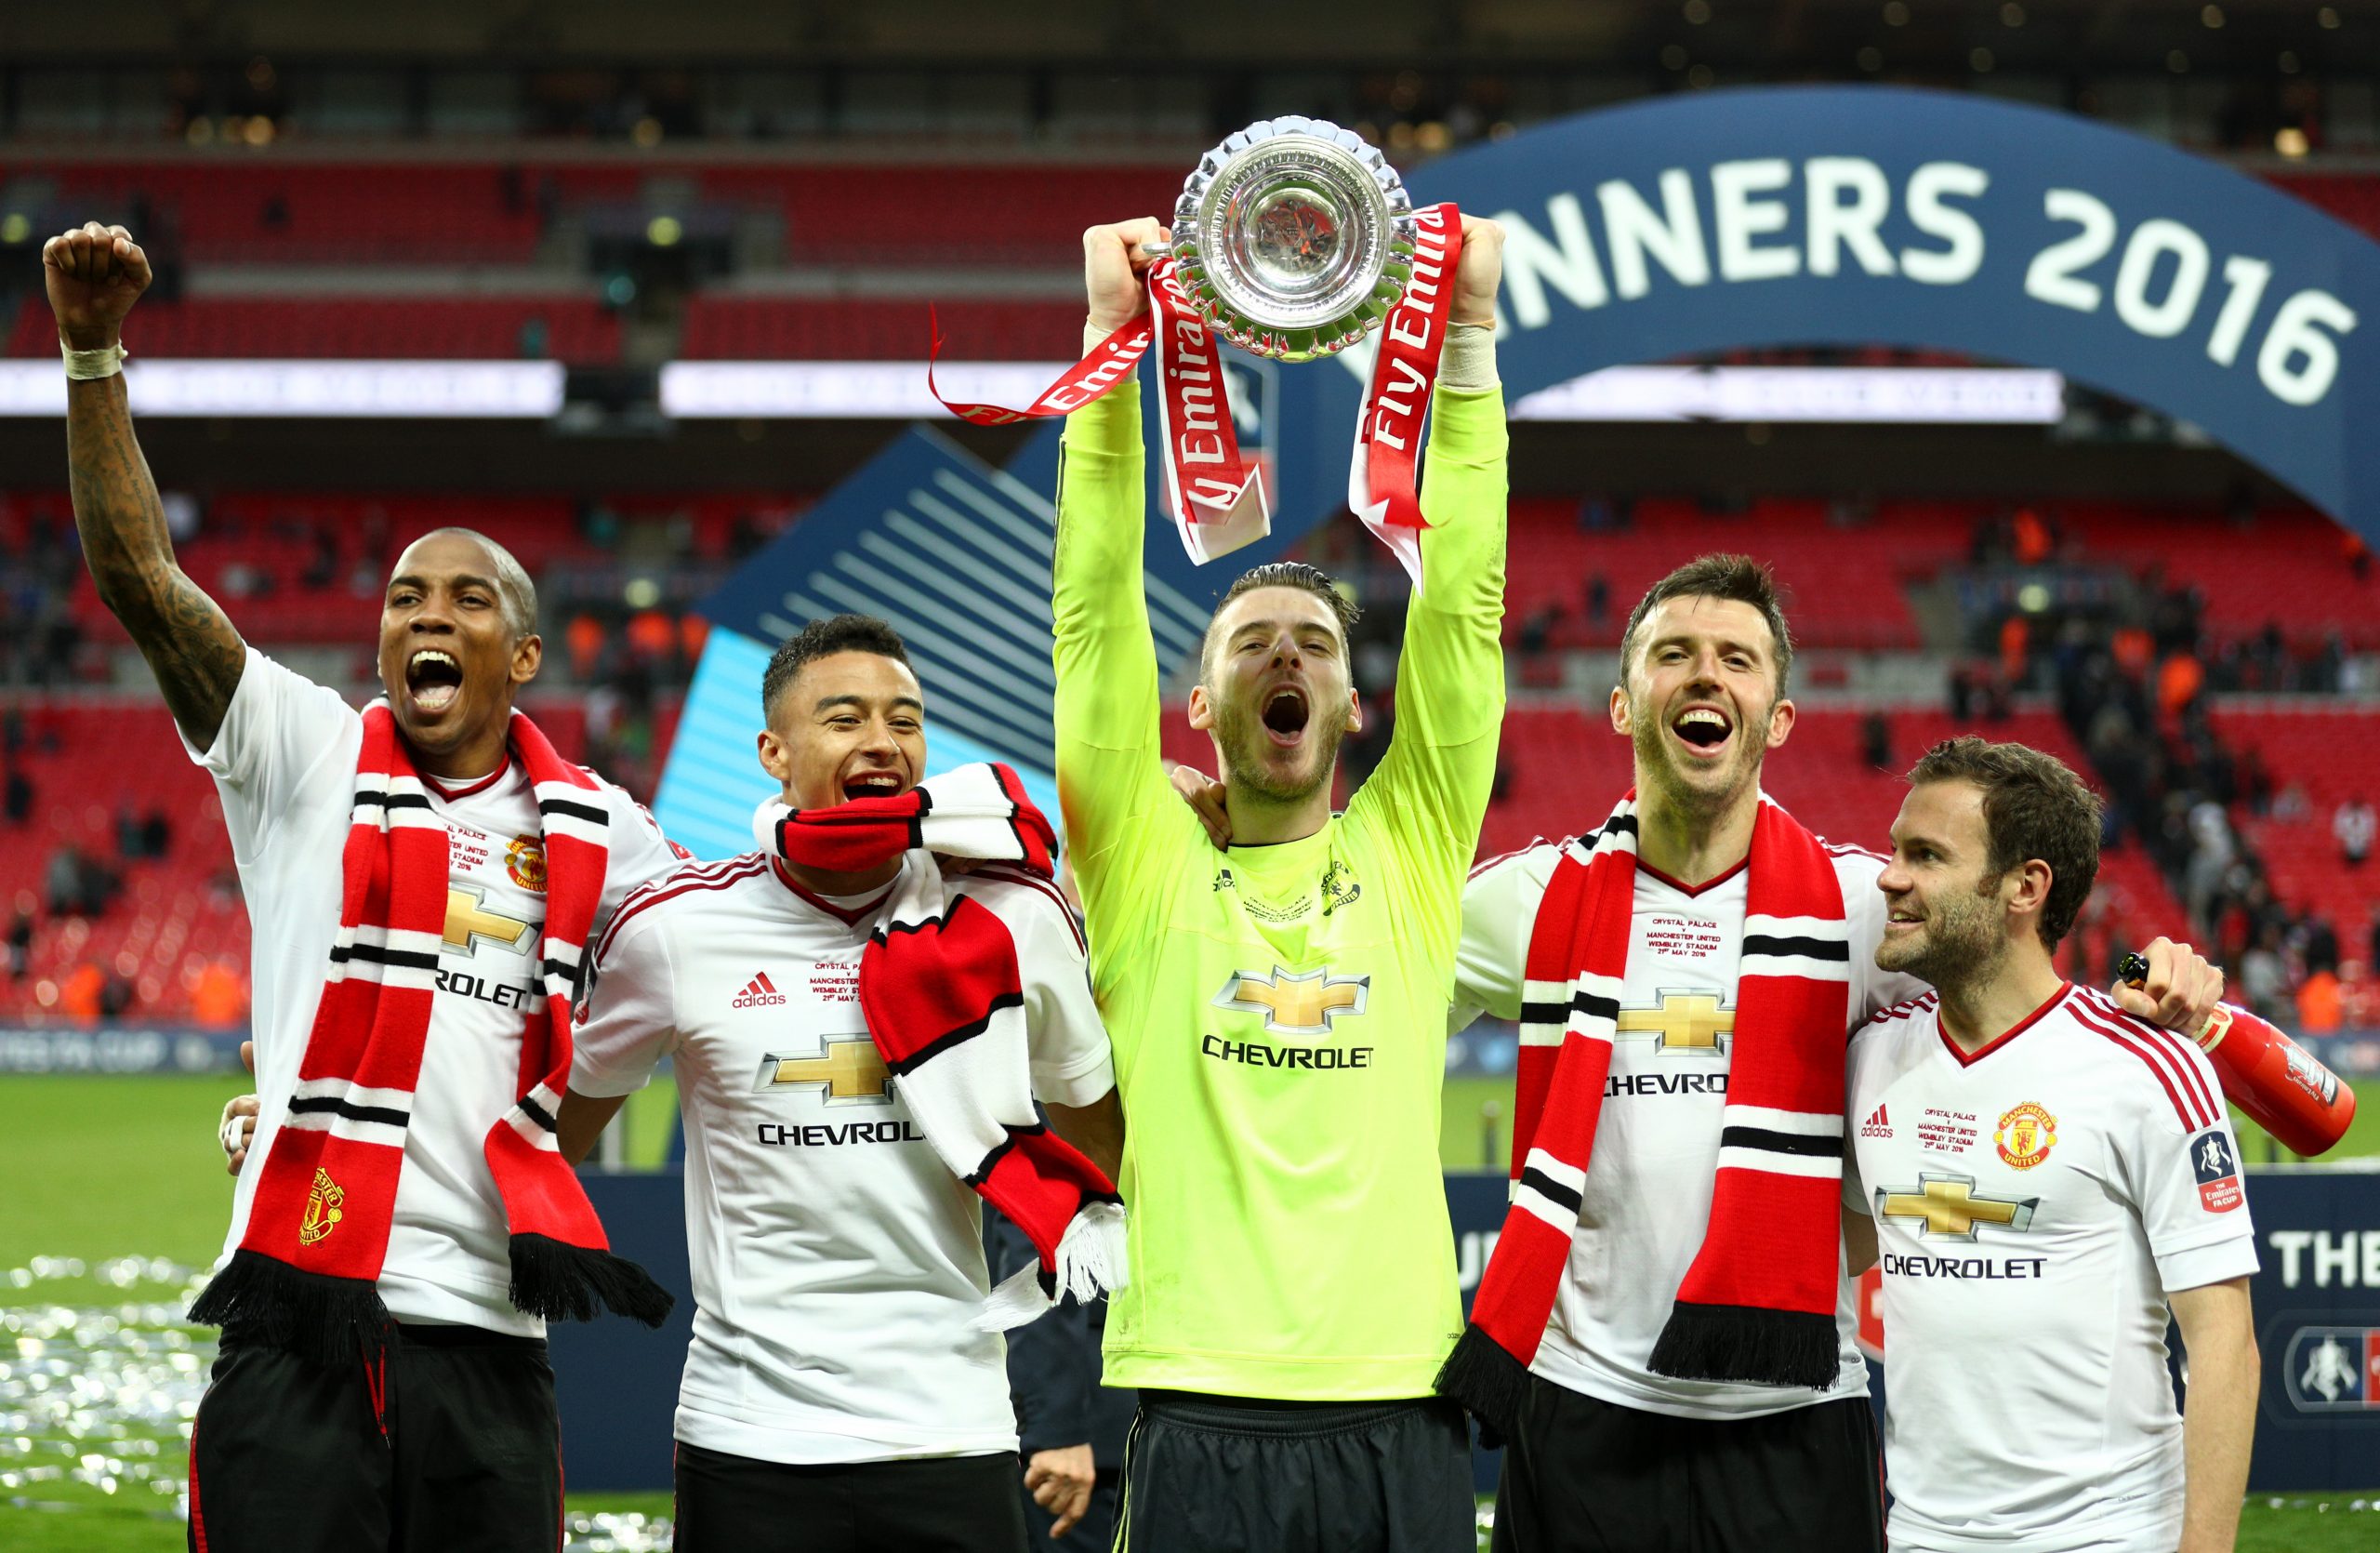 Ashley Young, Jesse Lingard, David De Gea, Michael Carrick and Juan Mata of Manchester United celebrate with the trophy on the pitch after The Emirates FA Cup Final match between Manchester United and Crystal Palace at Wembley Stadium on May 21, 2016. (Photo by Paul Gilham/Getty Images)